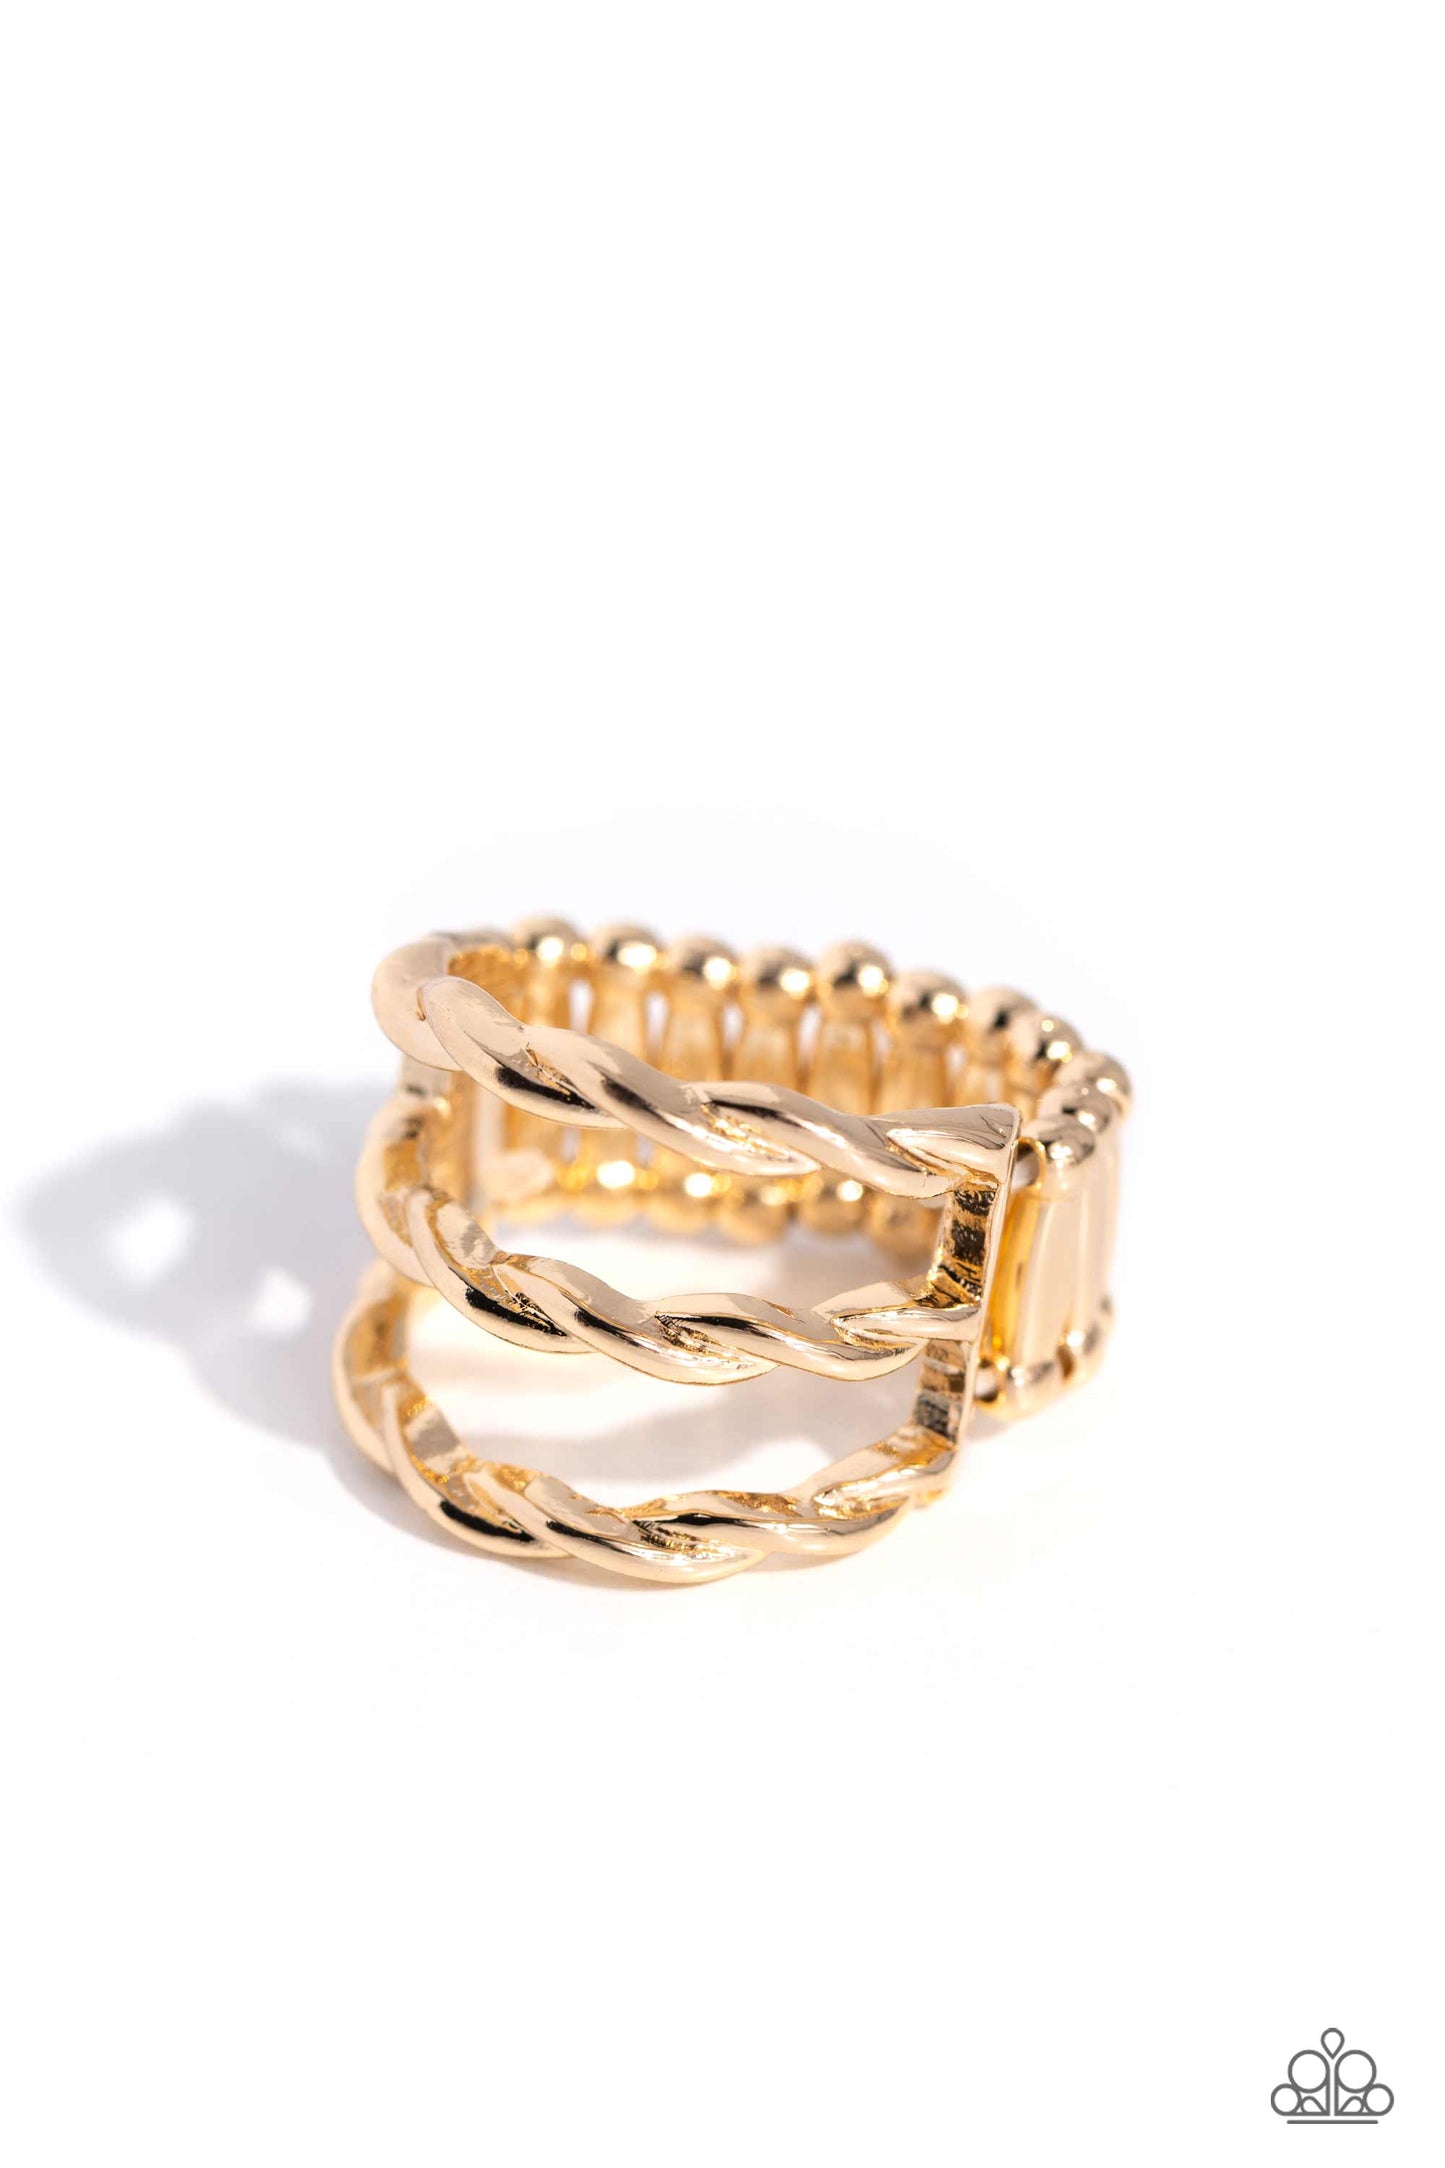 Corded Command - gold - Paparazzi ring